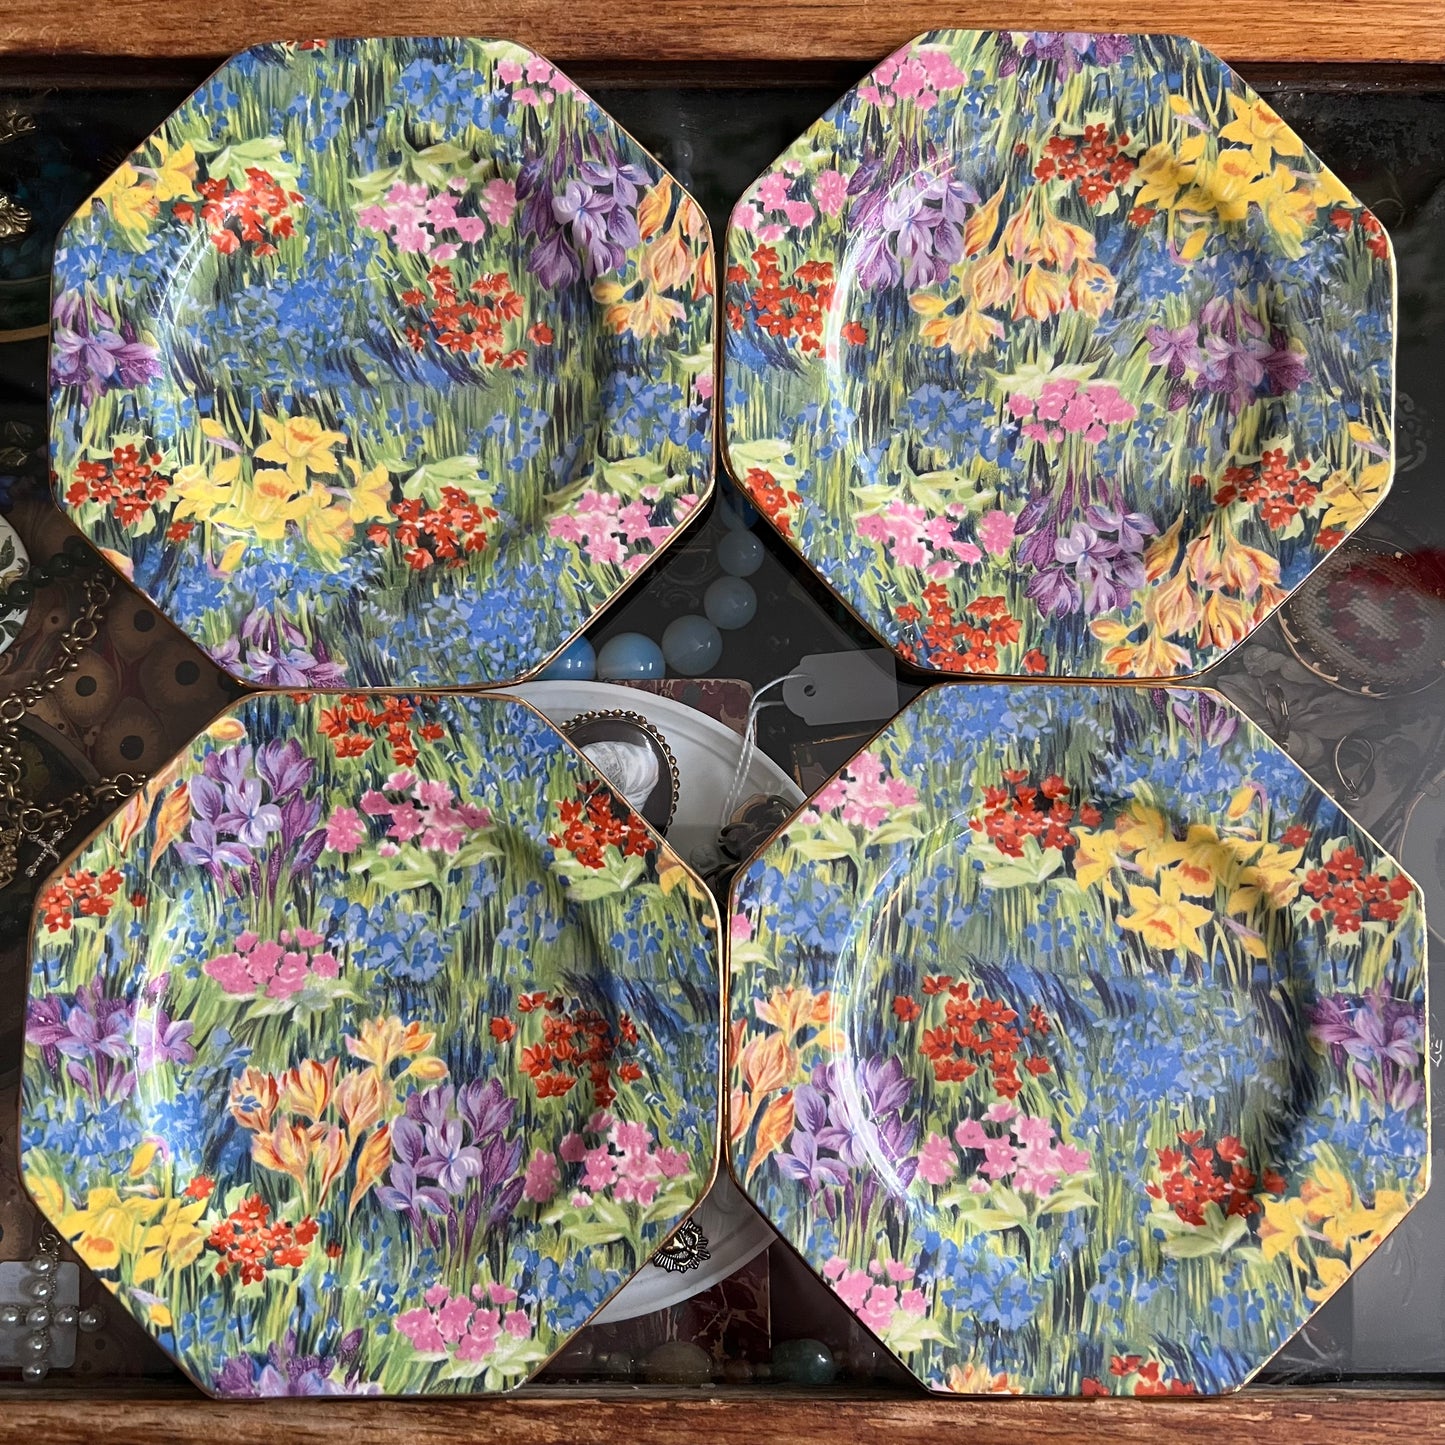 Rare 1920s ‘Mayflower’ Floral Pattern Plates by Royal Staffordshire Pottery Set 4